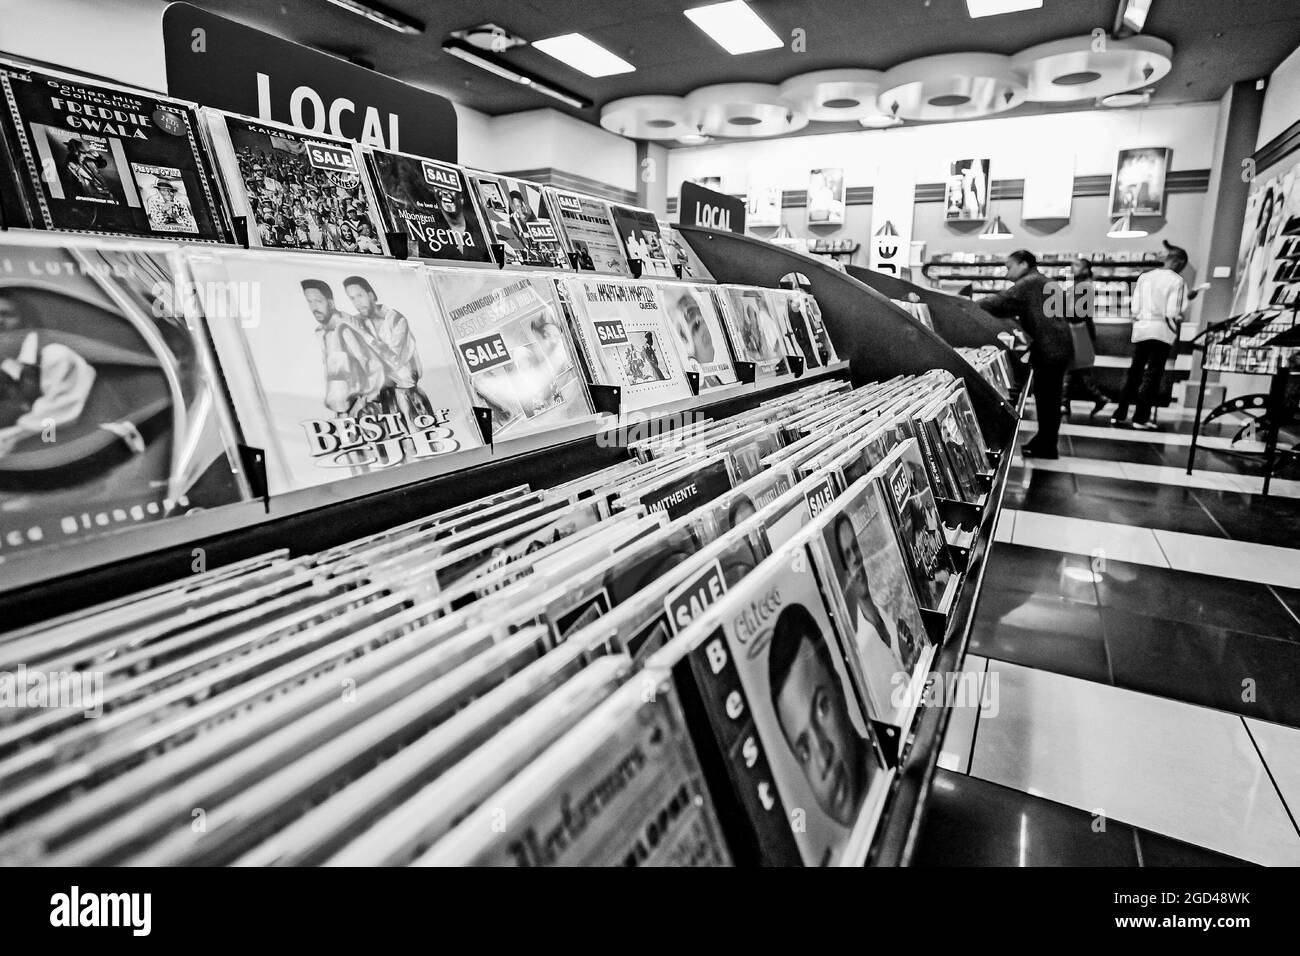 JOHANNESBURG, SOUTH AFRICA - Jan 06, 2021: A grayscale of the interior of a Music CD Store in a mall in Johannesburg, South Africa Stock Photo